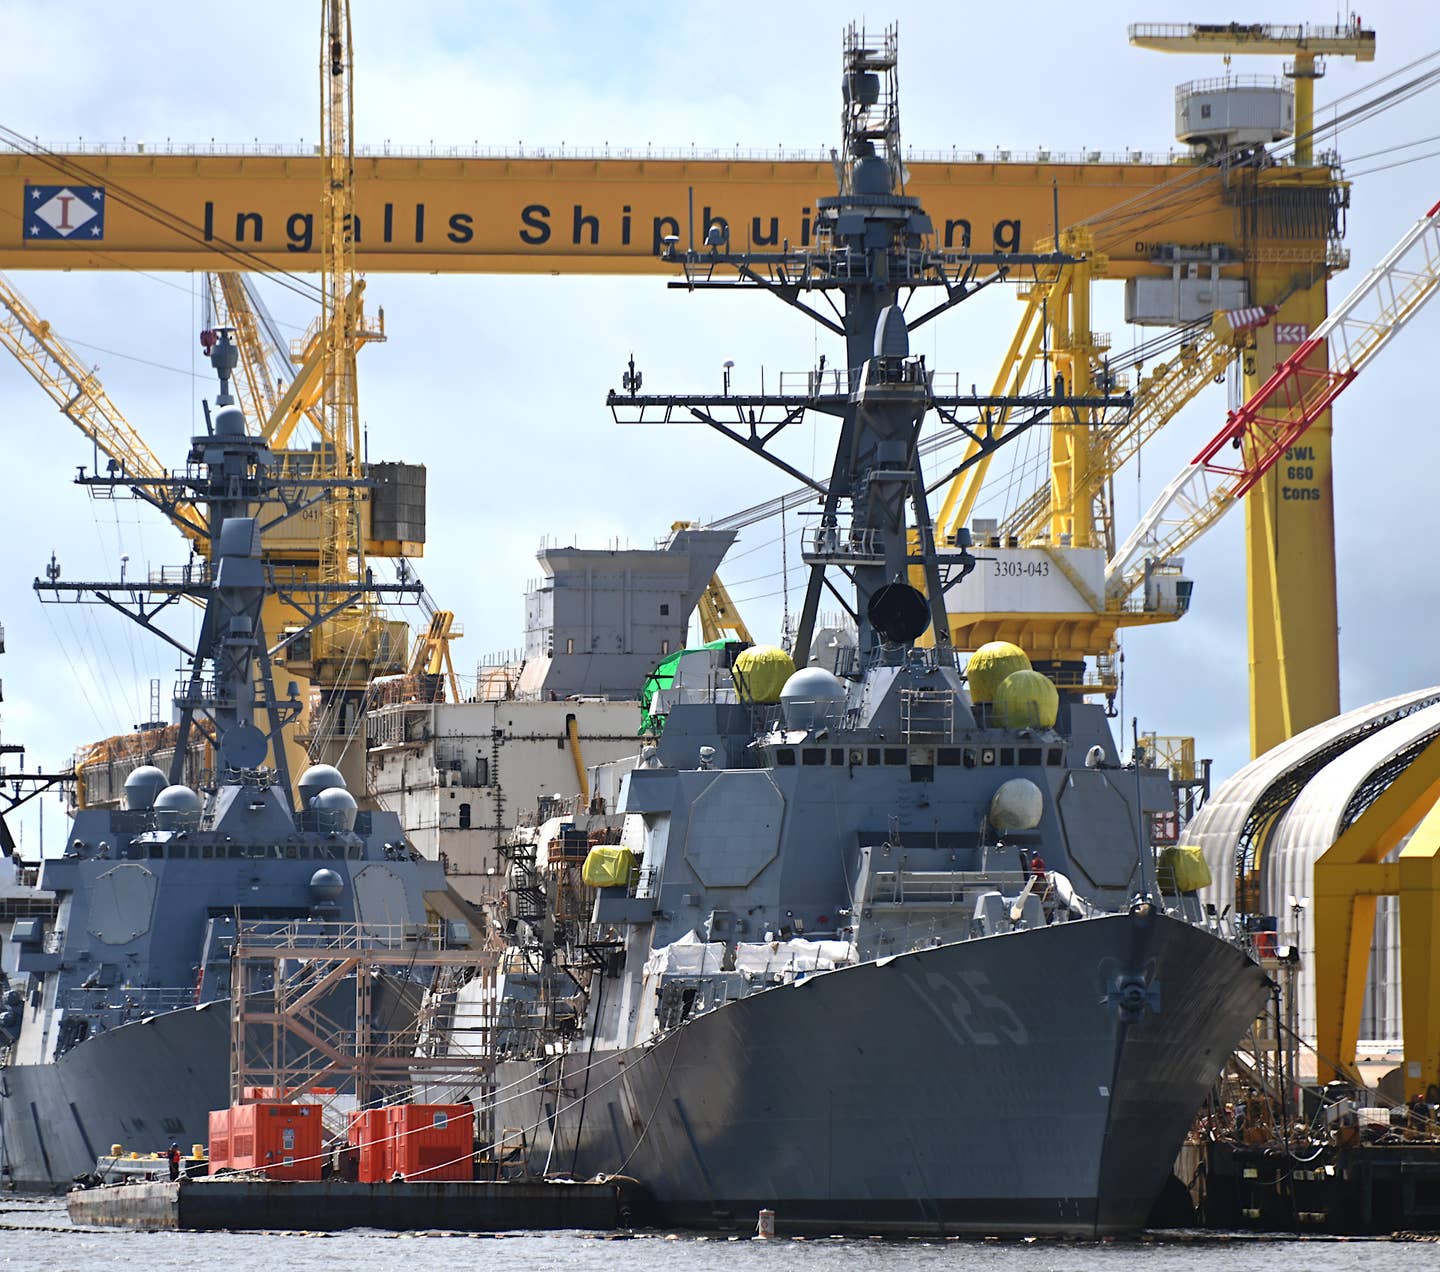 The future USS <em>Jack H. Lucas</em> being fitted out at the Ingalls Shipbuilding yard in Pascagoula, Mississippi on August 4, 2022. The future USS&nbsp;<em>Lenah H. Sutcliffe Higbee</em>, a Flight IIA <em>Arleigh Burke</em> class destroyer, is right behind <em>Jack H. Lucas</em>, offering a good comparison between the fixed-face antennas for the new AN/SPY-6(V)1 radar and those for the older AN/SPY-1D fitted to earlier ships of this class. The future USS <em>Bougainville</em>, a subvariant of the America class amphibious assault ship, can also be seen under construction behind the two destroyers. <em>Chris Cavas photo</em>&nbsp;